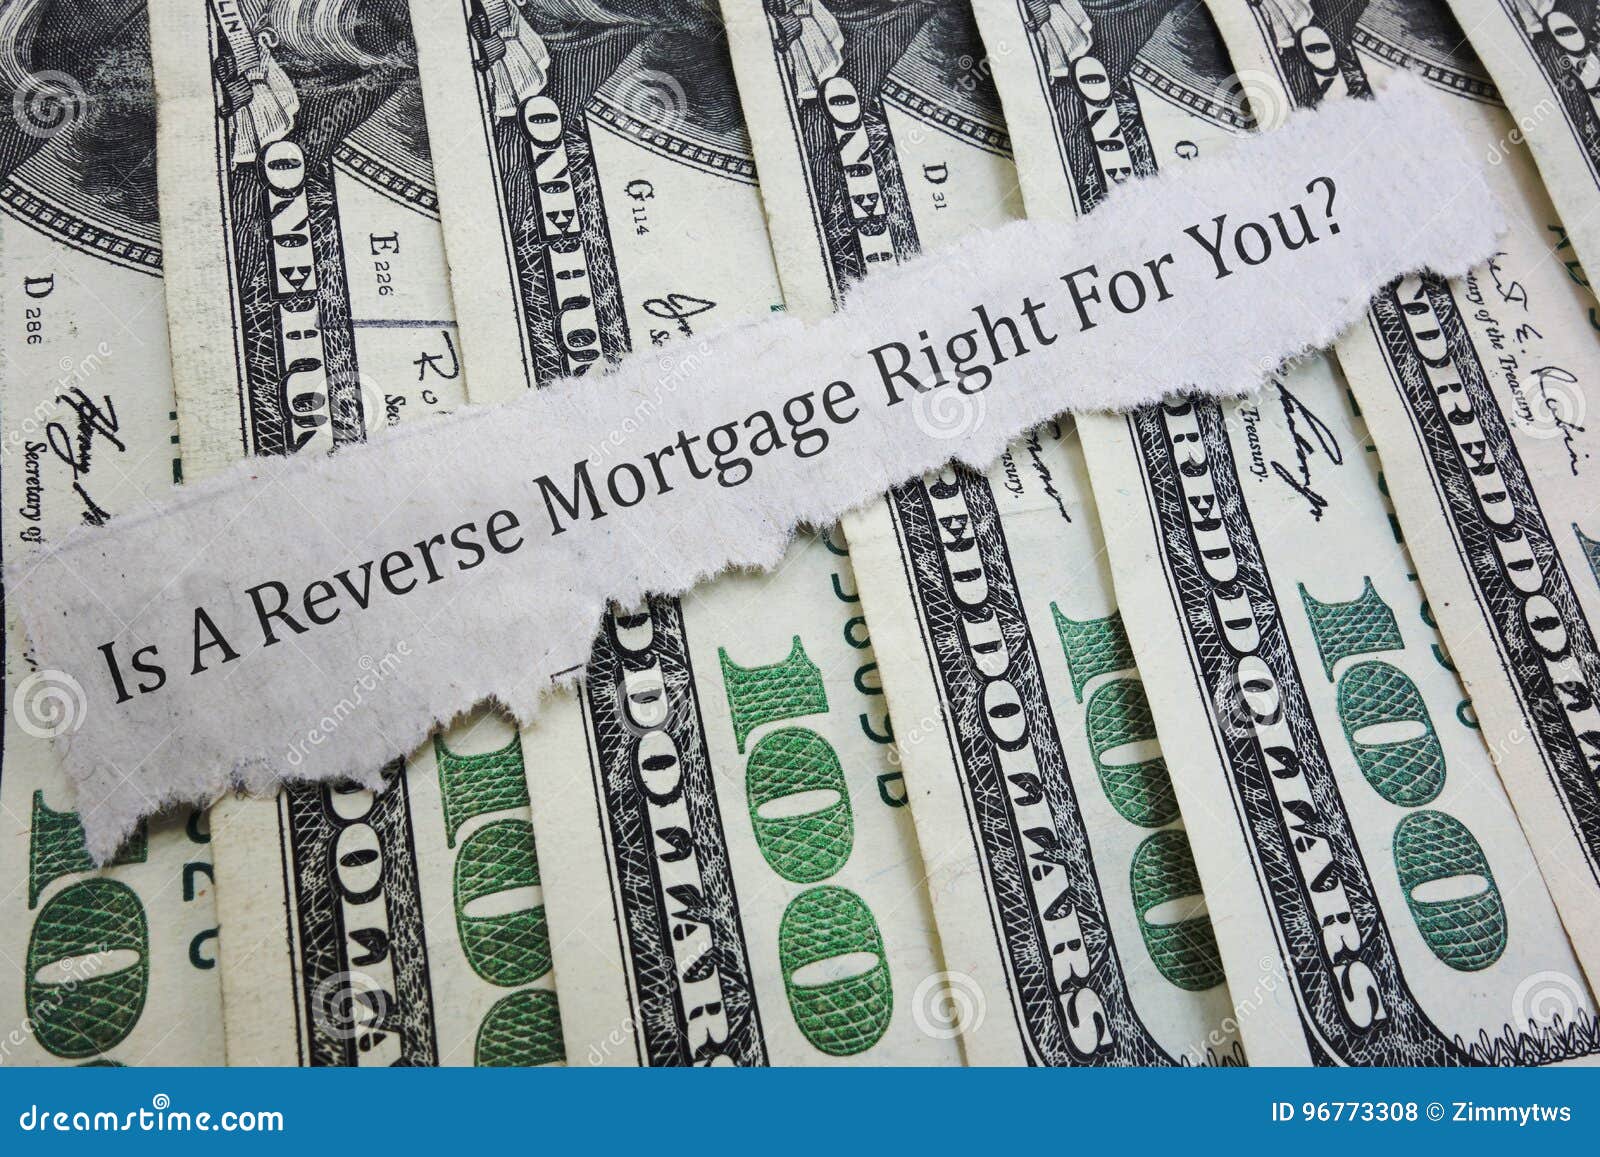 reverse mortgage question